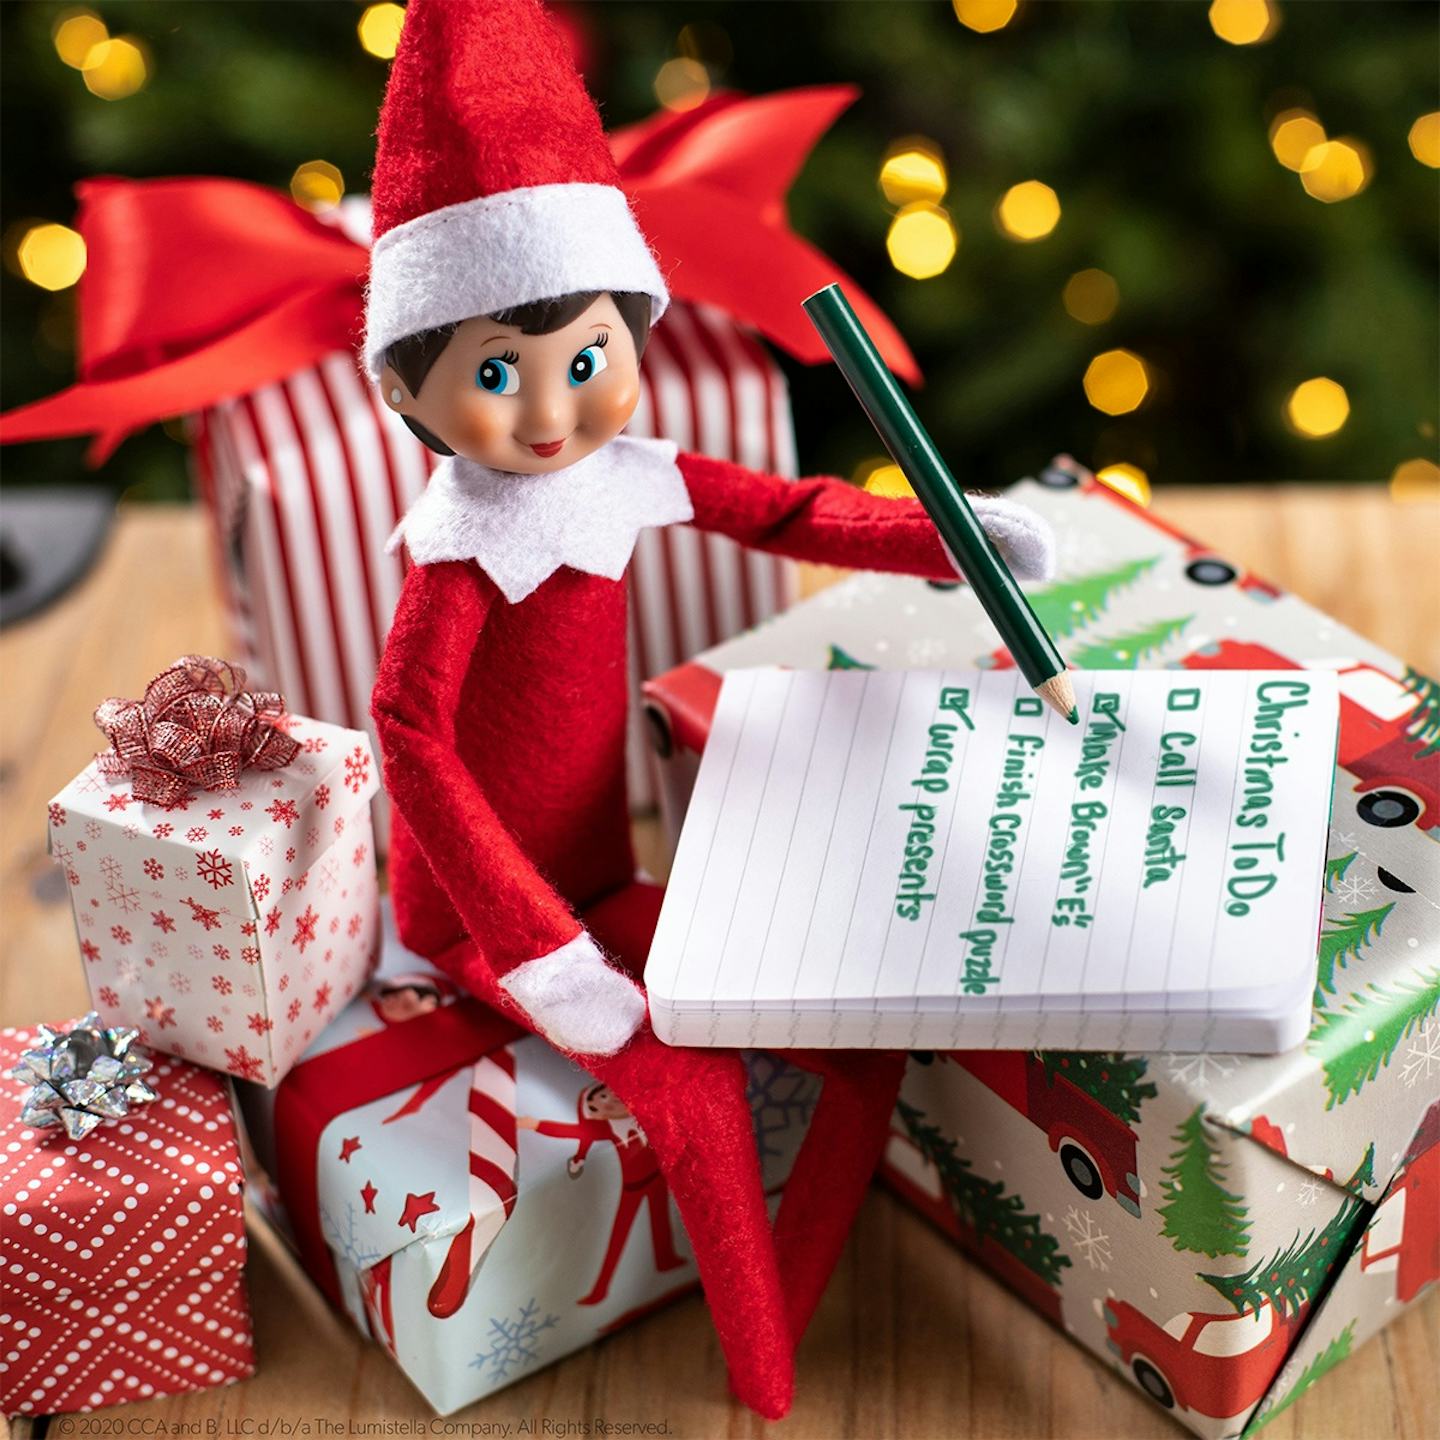 How To Introduce Elf On The Shelf To Your Kids For The First Time